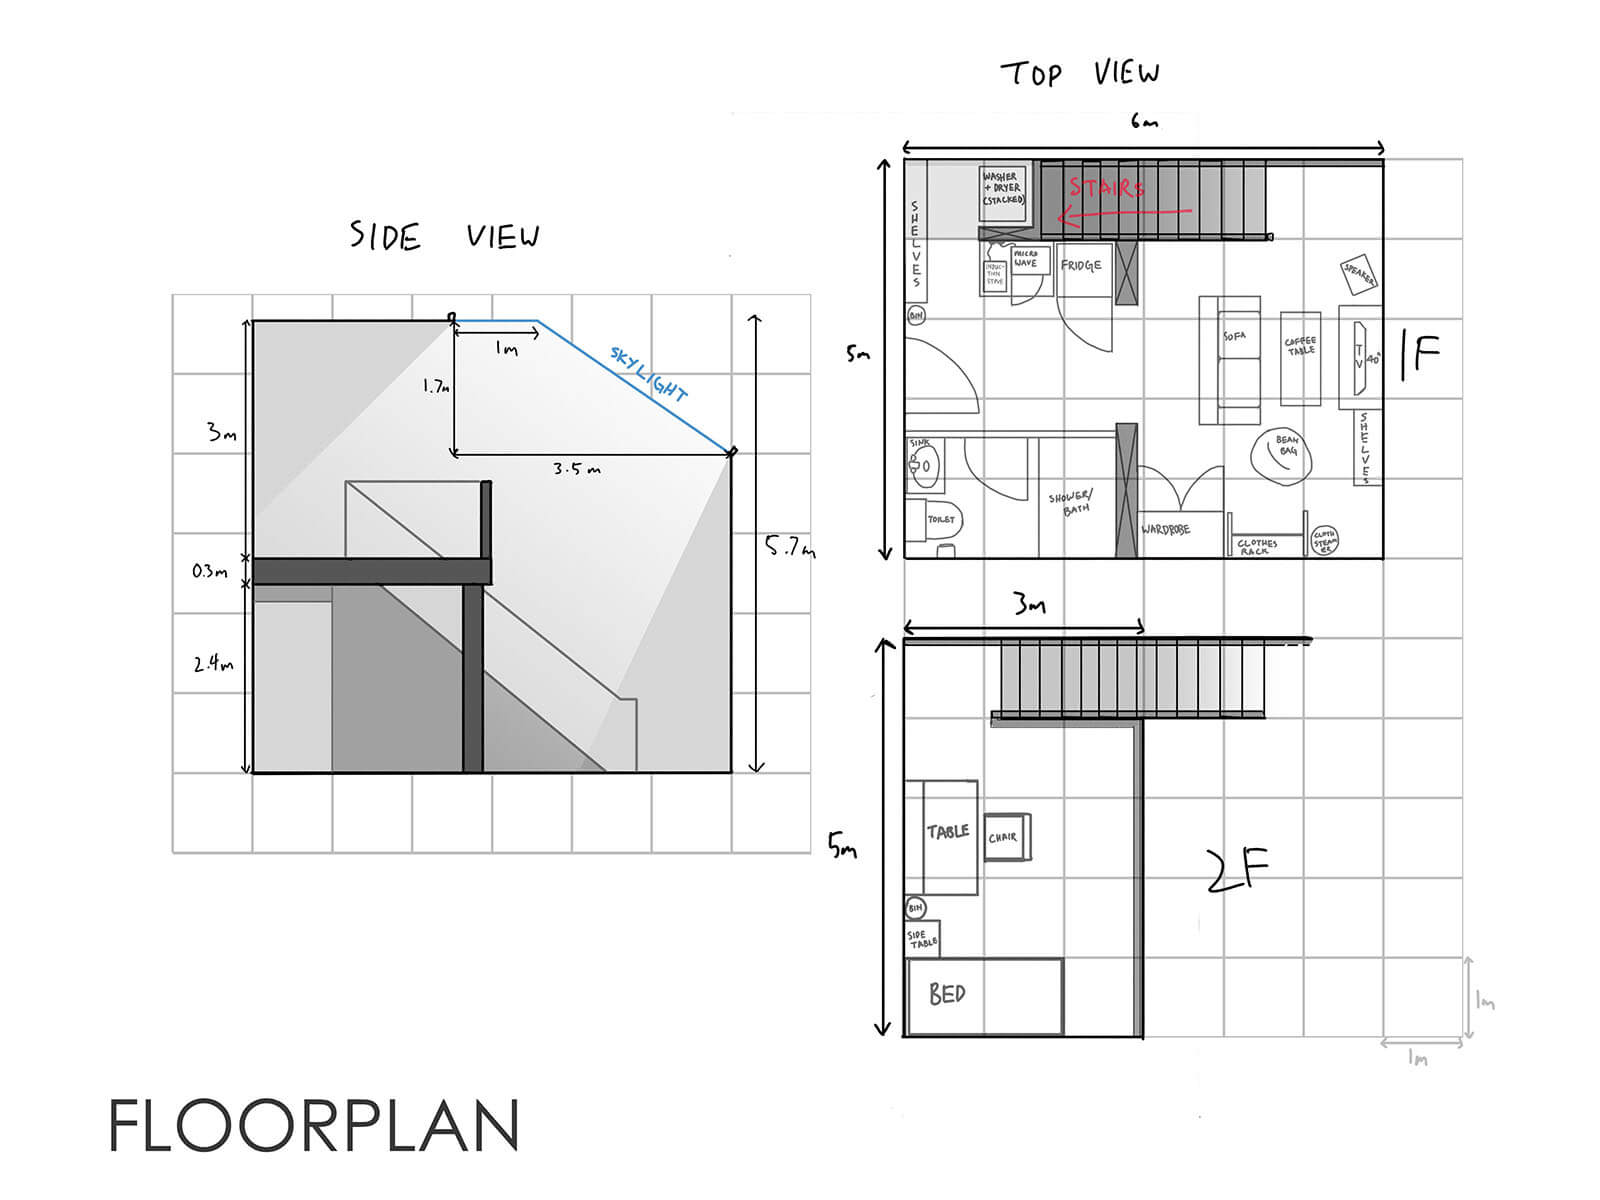 Top-down view of a Floorplan for a small apartment.